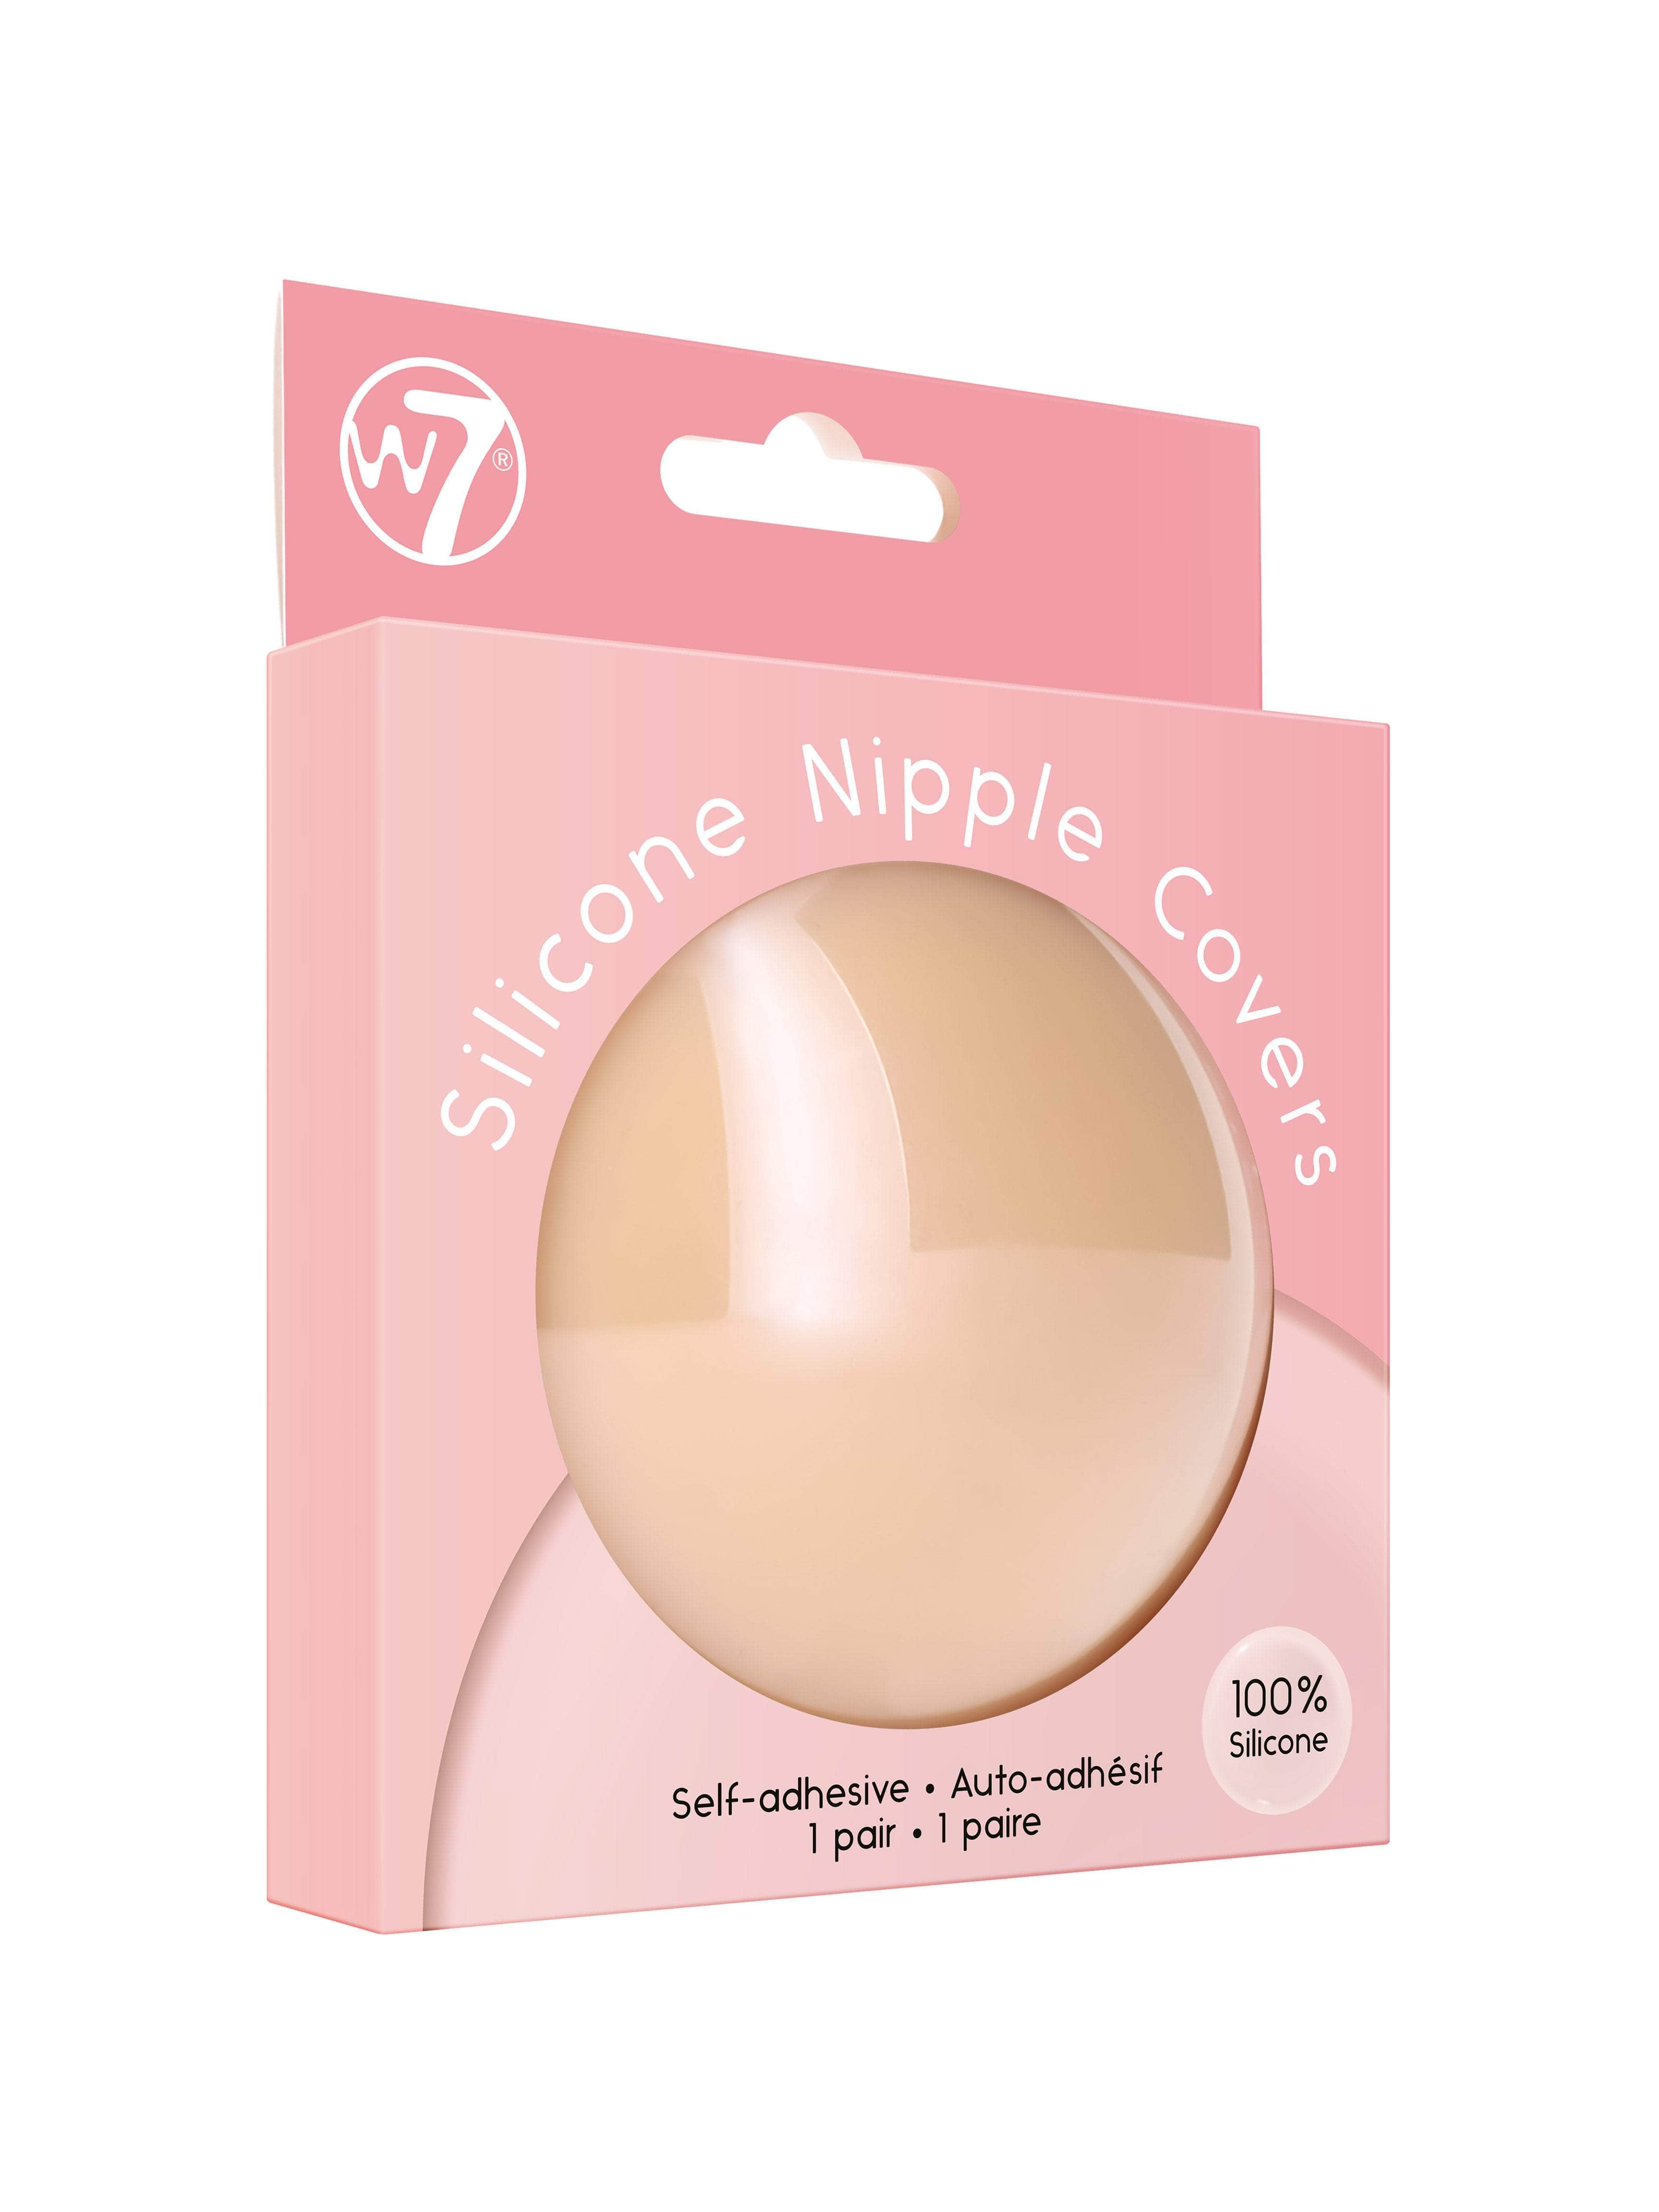 W7 Silicone Nipple Covers - W7 Makeup